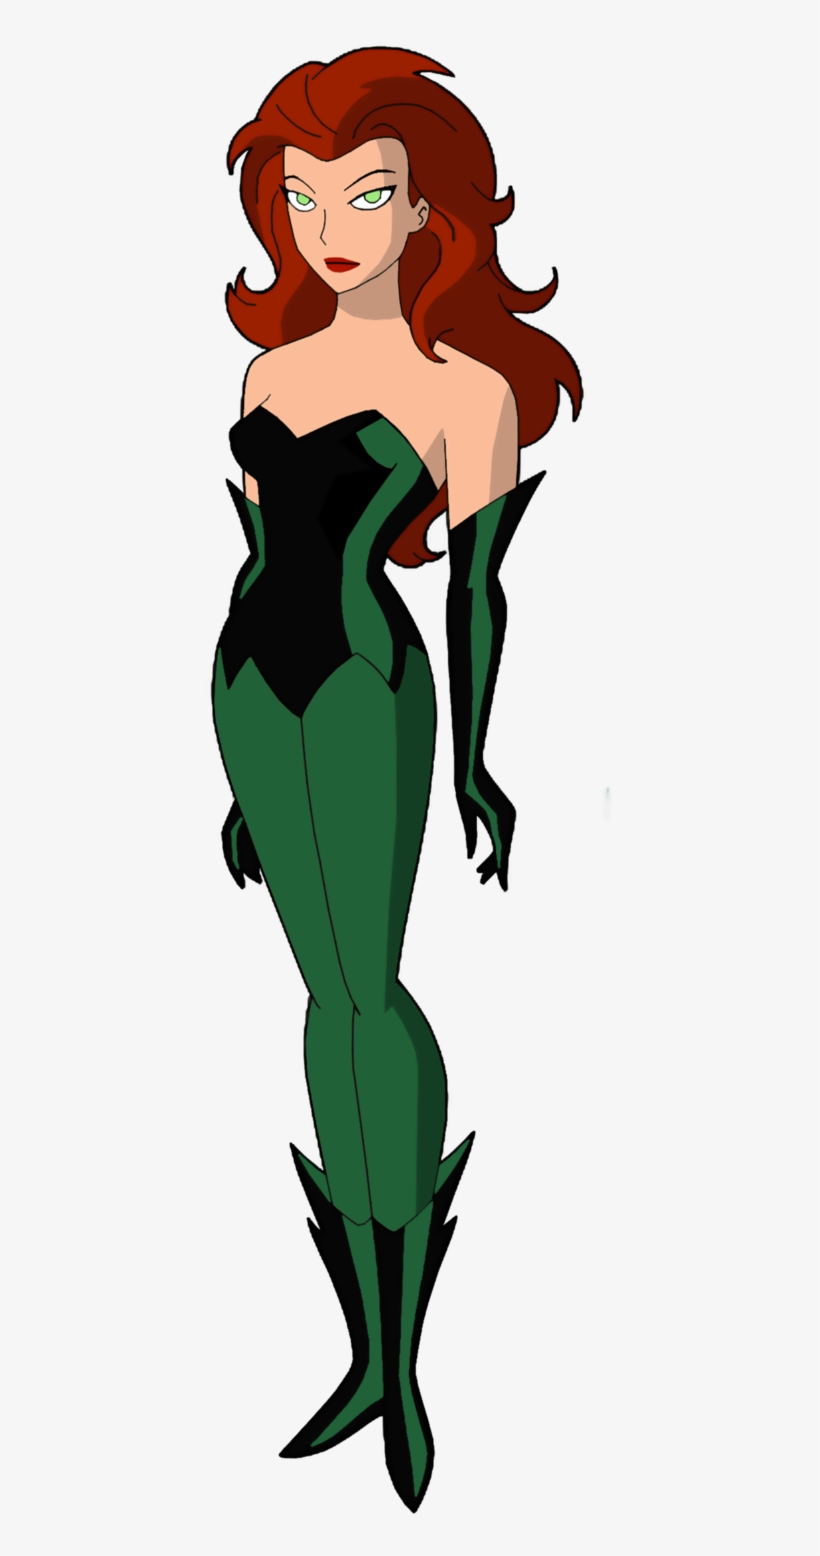 Poison Ivy Bruce Timm Style New Look By Noahlc - Bruce Timm Poison Ivy, transparent png #1281521